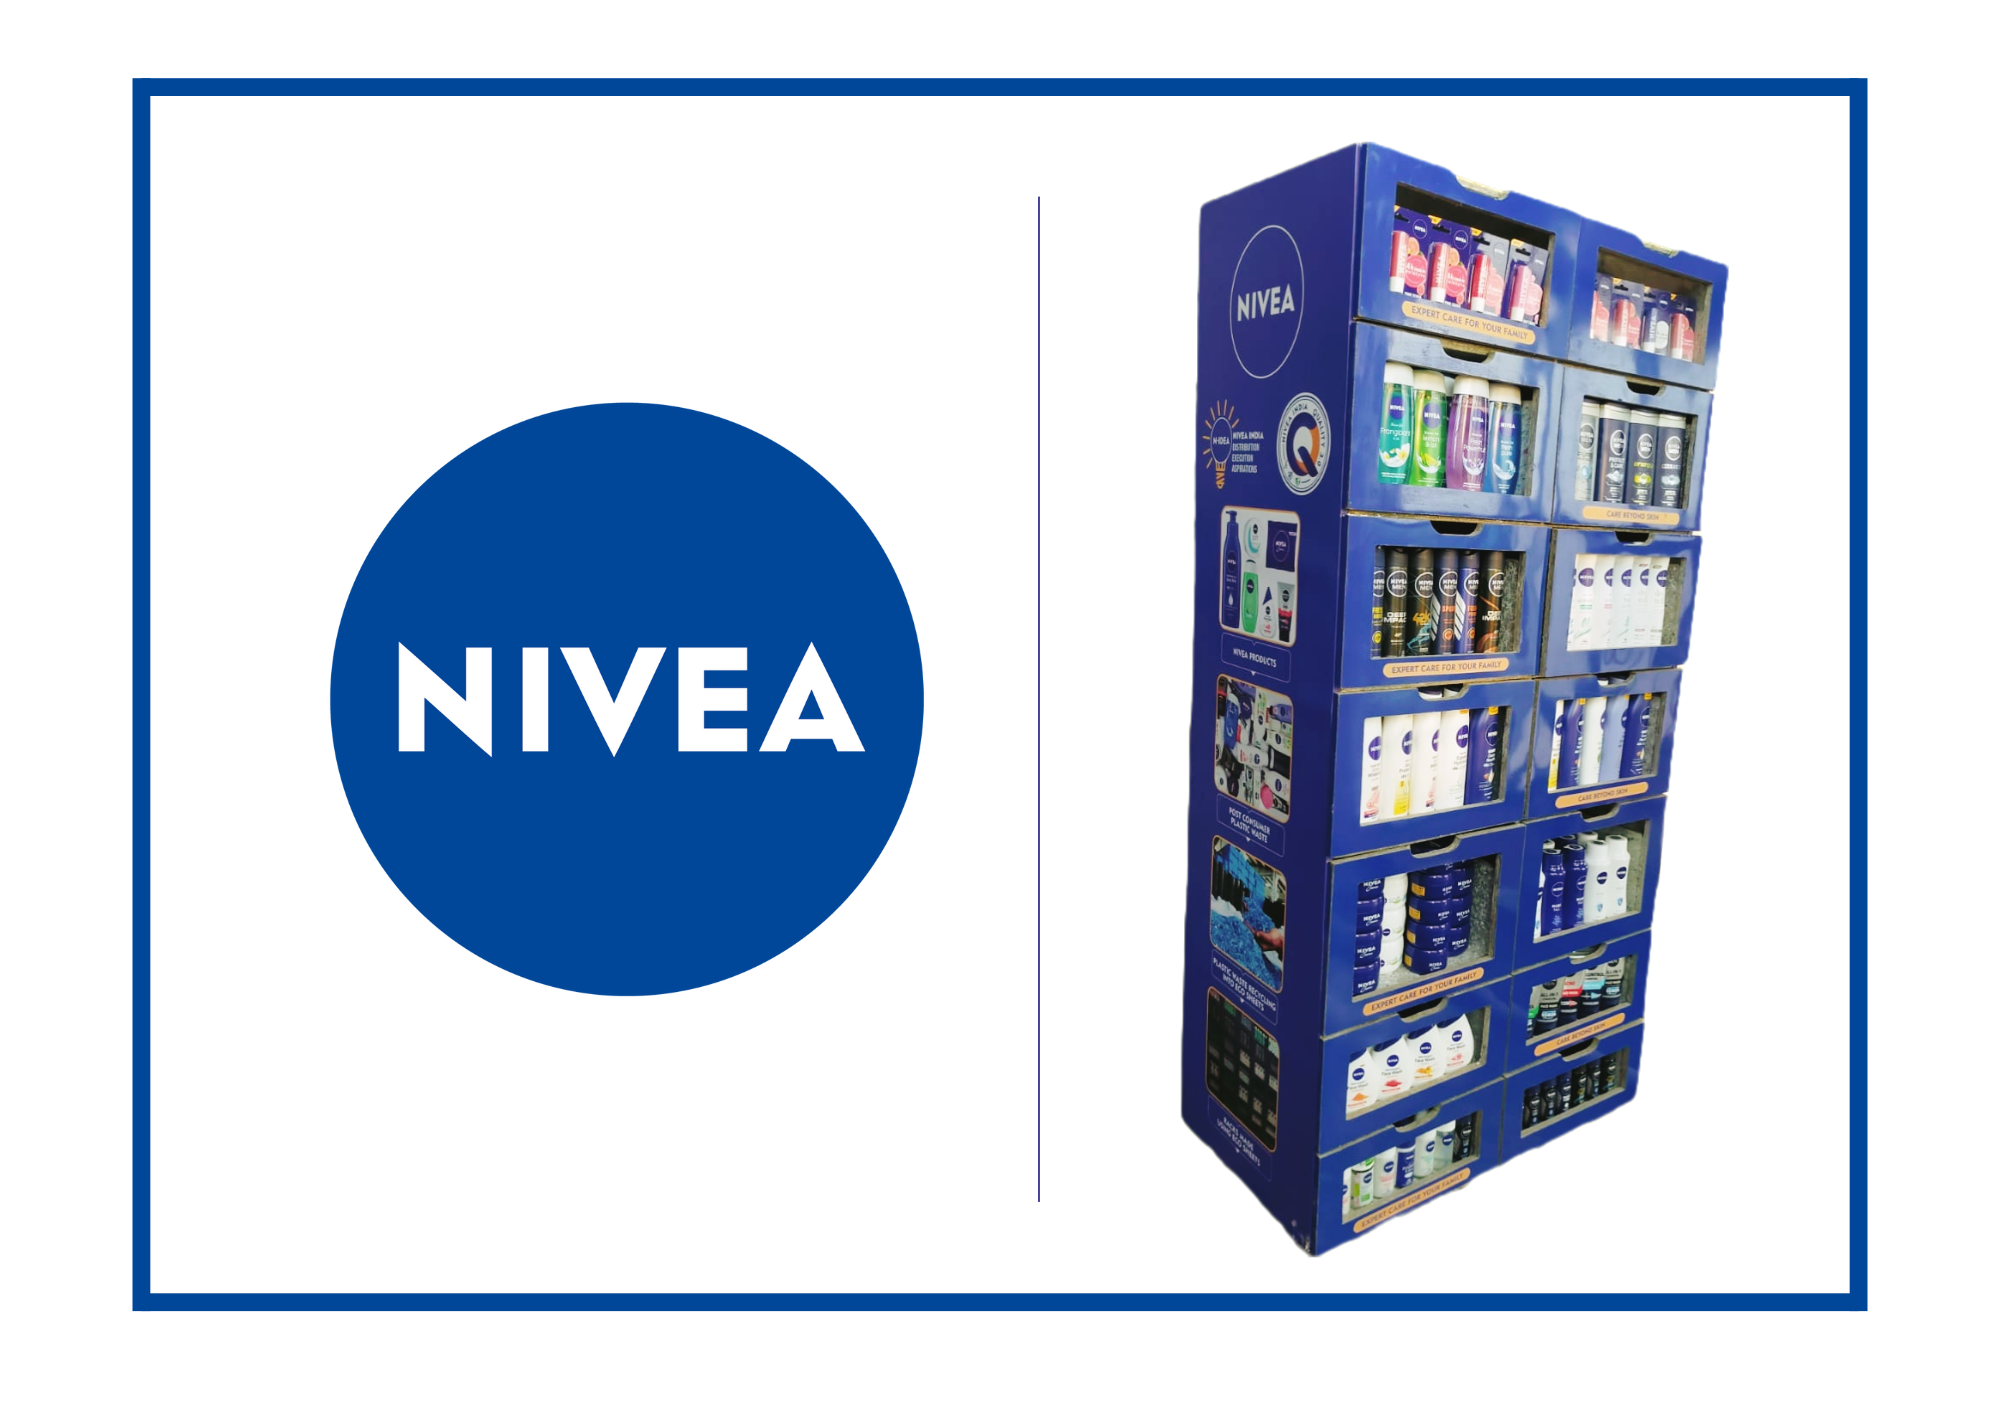 NIVEA-paving-the-way-to-a-sustainable-future-with-distributor-quality-program